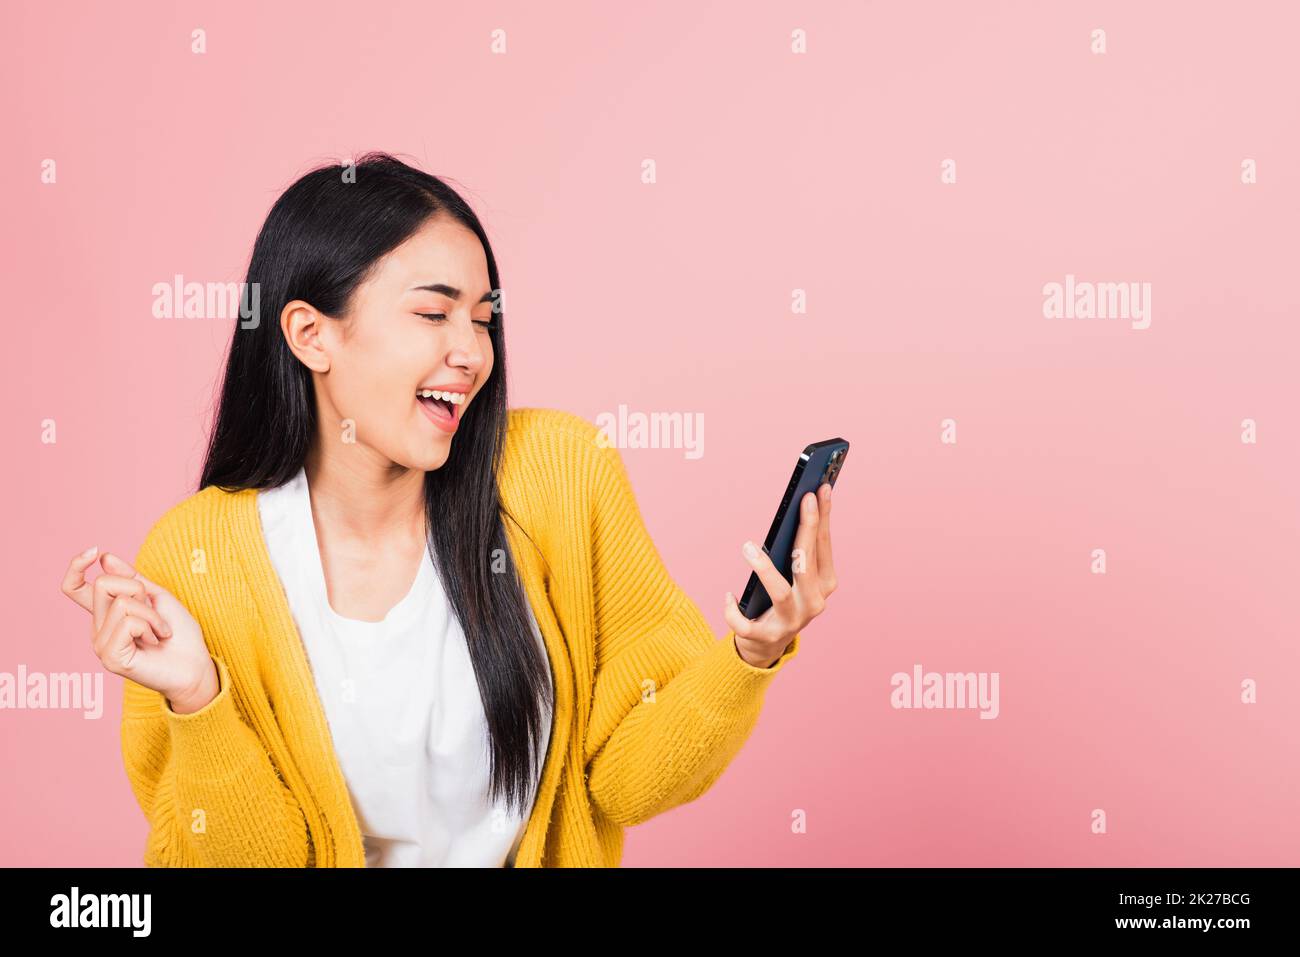 Happy Asian portrait beautiful cute young woman excited laughing holding mobile phone, studio shot isolated on pink background, female using funny smartphone making winner gesture Stock Photo